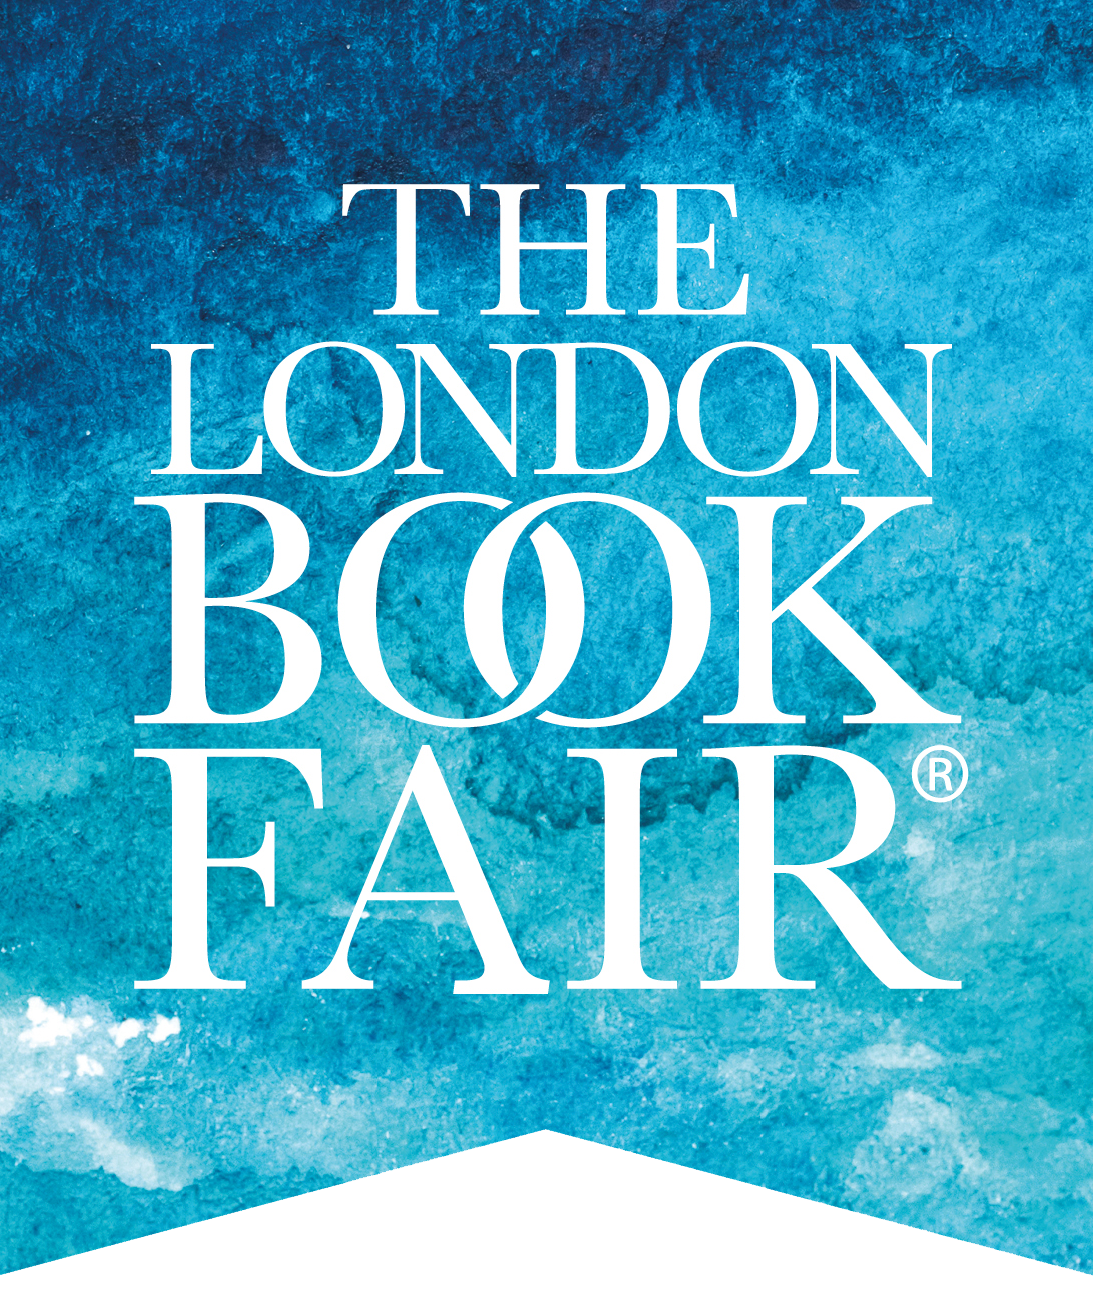 london book fair logo The Alliance of Independent Authors